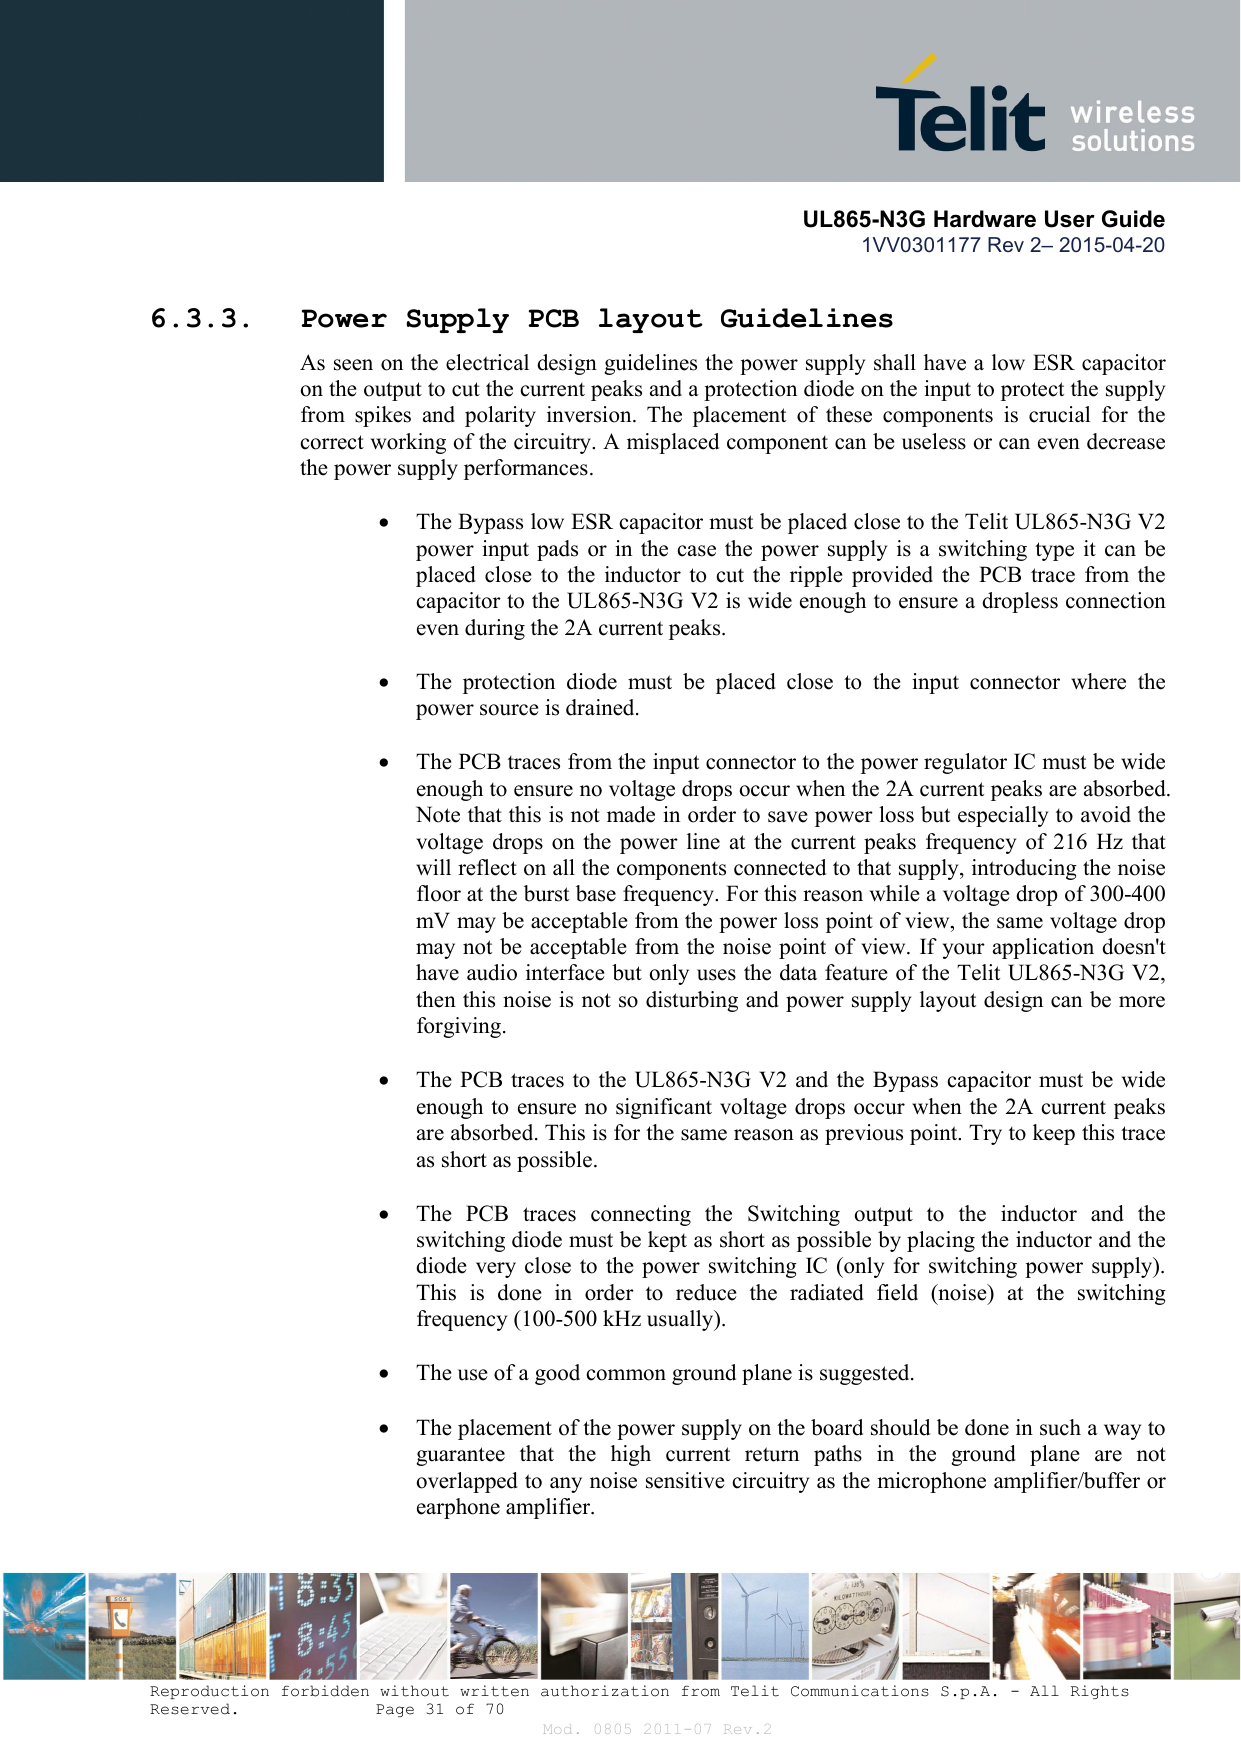       UL865-N3G Hardware User Guide 1VV0301177 Rev 2– 2015-04-20  Reproduction forbidden without written authorization from Telit Communications S.p.A. - All Rights Reserved.    Page 31 of 70 Mod. 0805 2011-07 Rev.2 6.3.3. Power Supply PCB layout Guidelines As seen on the electrical design guidelines the power supply shall have a low ESR capacitor on the output to cut the current peaks and a protection diode on the input to protect the supply from  spikes  and  polarity  inversion.  The  placement  of  these  components  is  crucial  for  the correct working of the circuitry. A misplaced component can be useless or can even decrease the power supply performances.   The Bypass low ESR capacitor must be placed close to the Telit UL865-N3G V2 power input  pads or  in the  case the power  supply is a  switching type it can  be placed  close  to  the  inductor  to  cut  the  ripple  provided the  PCB  trace  from  the capacitor to the UL865-N3G V2 is wide enough to ensure a dropless connection even during the 2A current peaks.   The  protection  diode  must  be  placed  close  to  the  input  connector  where  the power source is drained.   The PCB traces from the input connector to the power regulator IC must be wide enough to ensure no voltage drops occur when the 2A current peaks are absorbed. Note that this is not made in order to save power loss but especially to avoid the voltage  drops  on  the  power  line  at  the  current  peaks  frequency  of  216  Hz  that will reflect on all the components connected to that supply, introducing the noise floor at the burst base frequency. For this reason while a voltage drop of 300-400 mV may be acceptable from the power loss point of view, the same voltage drop may not be acceptable from the noise point of view. If your application doesn&apos;t have audio interface but only uses the data feature of the Telit UL865-N3G V2, then this noise is not so disturbing and power supply layout design can be more forgiving.   The PCB traces to the UL865-N3G V2 and  the Bypass capacitor must be wide enough to ensure no significant voltage drops occur when the 2A current peaks are absorbed. This is for the same reason as previous point. Try to keep this trace as short as possible.   The  PCB  traces  connecting  the  Switching  output  to  the  inductor  and  the switching diode must be kept as short as possible by placing the inductor and the diode  very close to  the  power switching IC (only  for  switching power  supply). This  is  done  in  order  to  reduce  the  radiated  field  (noise)  at  the  switching frequency (100-500 kHz usually).   The use of a good common ground plane is suggested.   The placement of the power supply on the board should be done in such a way to guarantee  that  the  high  current  return  paths  in  the  ground  plane  are  not overlapped to any noise sensitive circuitry as the microphone amplifier/buffer or earphone amplifier.   